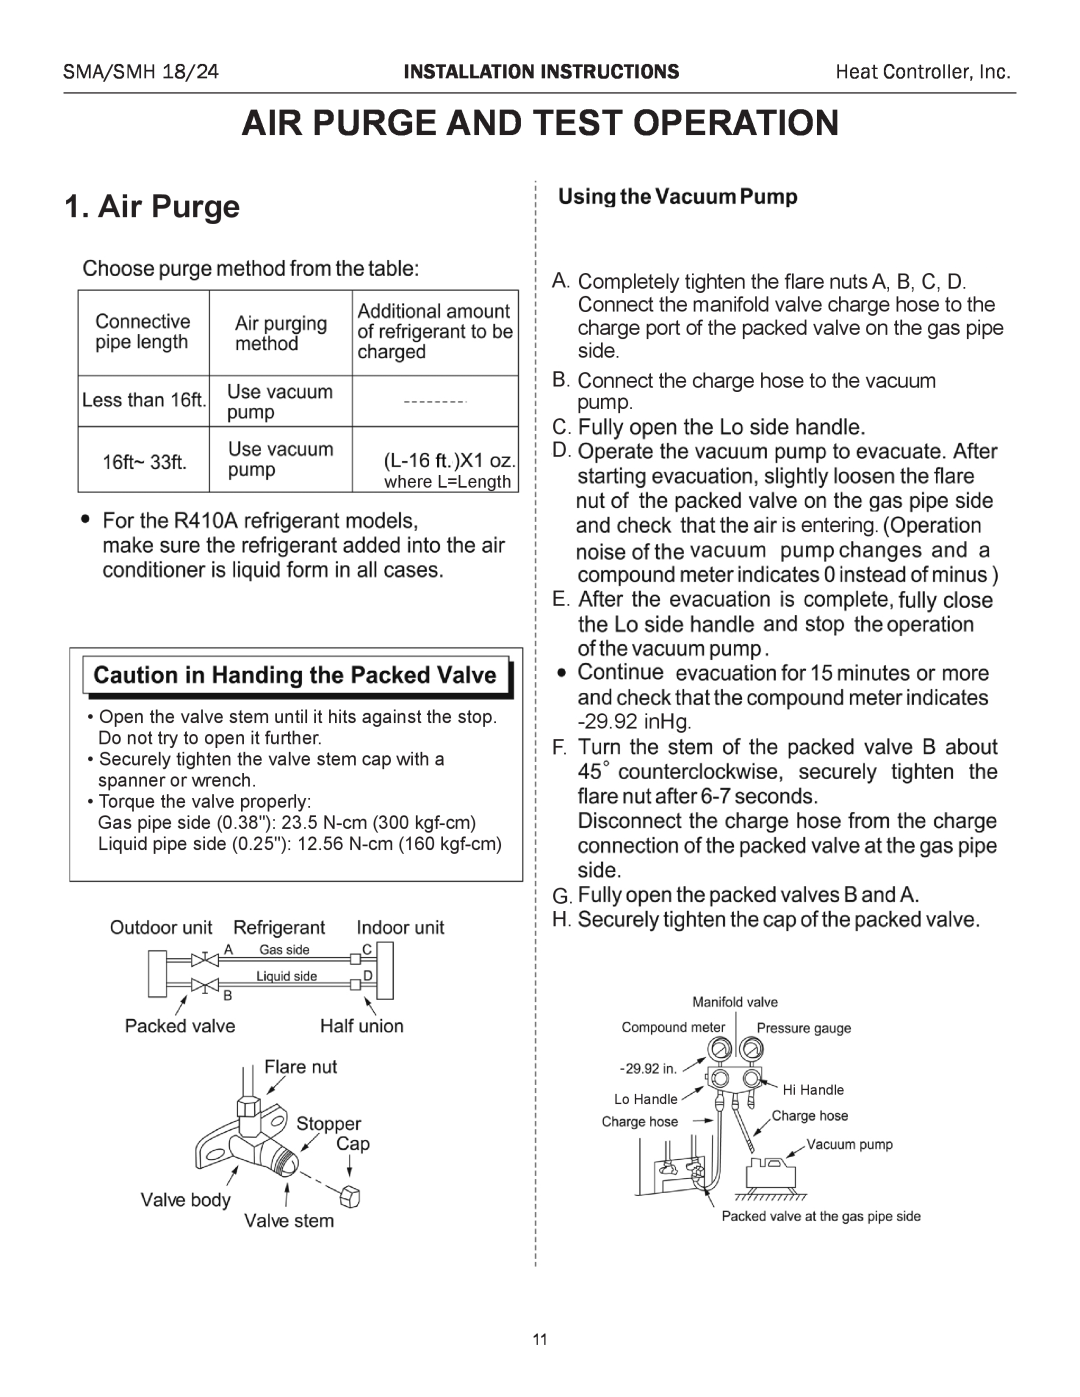 Heat Controller SMA 18 installation instructions Air Purge And Test Operation 